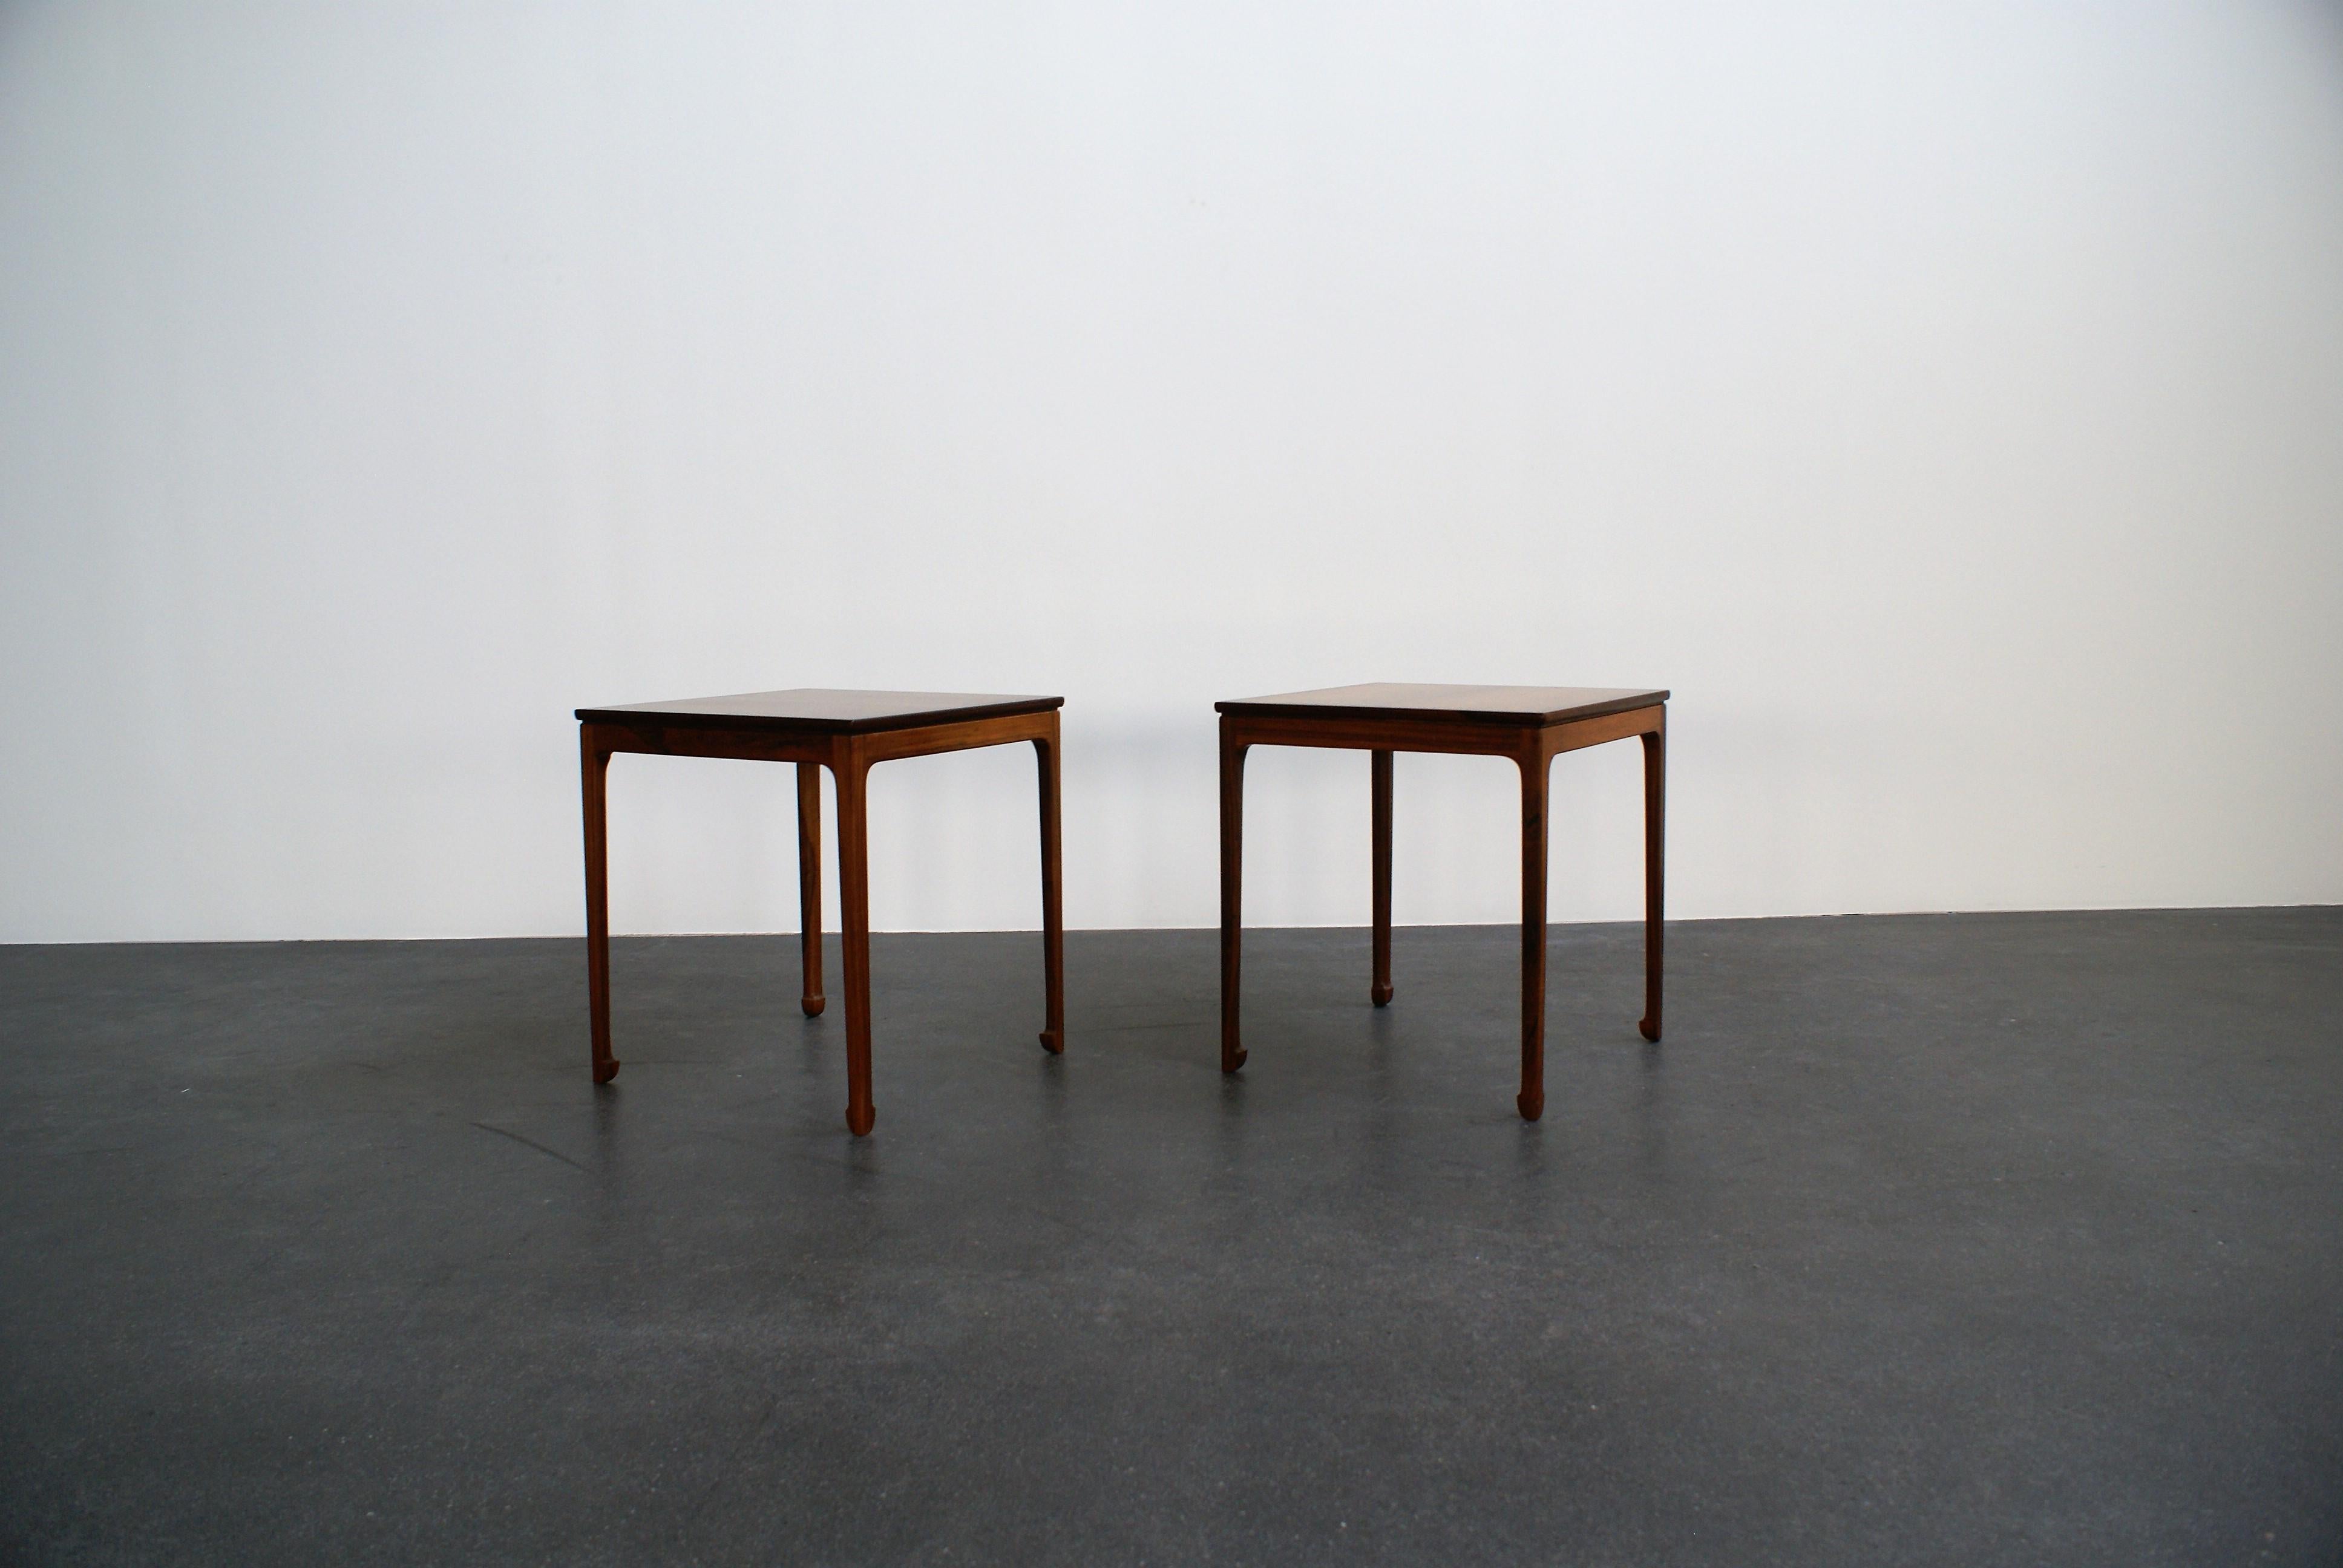 Pair of Ole Wanscher side tables in Brazilian rosewood for master cabinetmaker A. J Iversen. Very elegant pair of tables with spade feet and solid rosewood.

Litterature: Grete Jalk, ed., Dansk Møbelkunst gennem 40 aar, Volume 4 : 1957-1966,